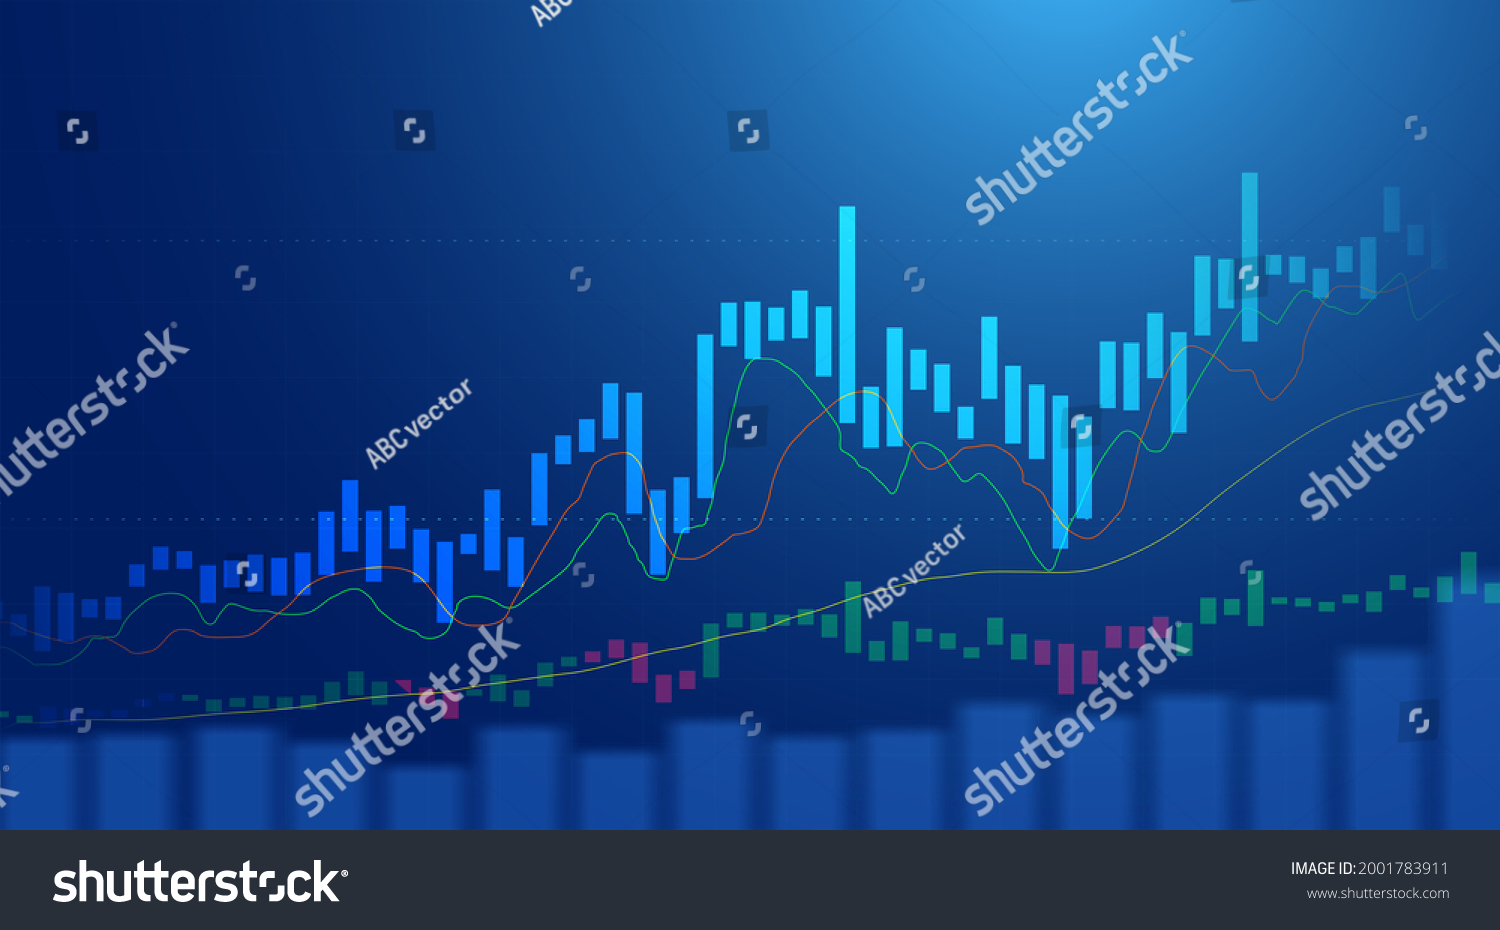 SVG of Business candle stick graph chart of stock market investment trading on blue background. Bullish point, up trend of graph. Economy vector design svg